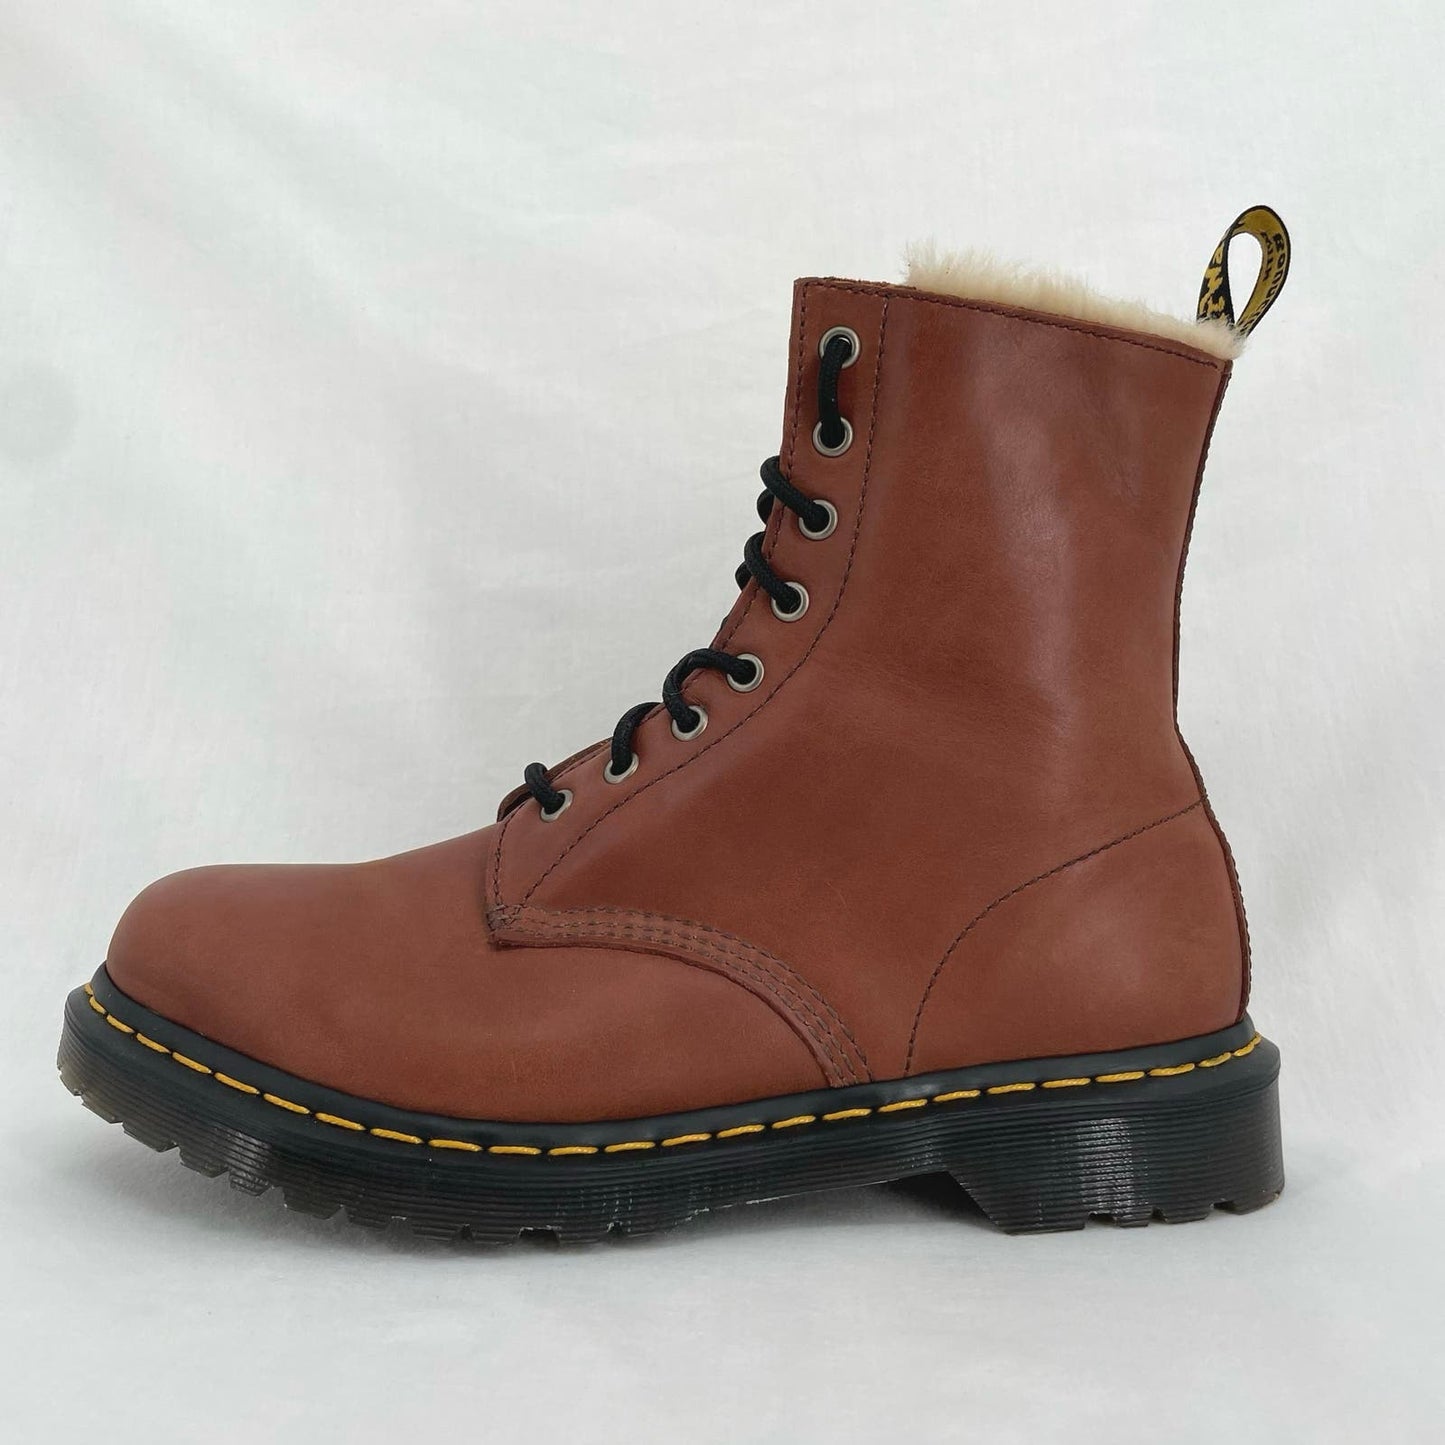 Dr. Martens Serena 1460 Tan Faux Fur Lined Boots Laced Winter Farrier Chalet Size 10